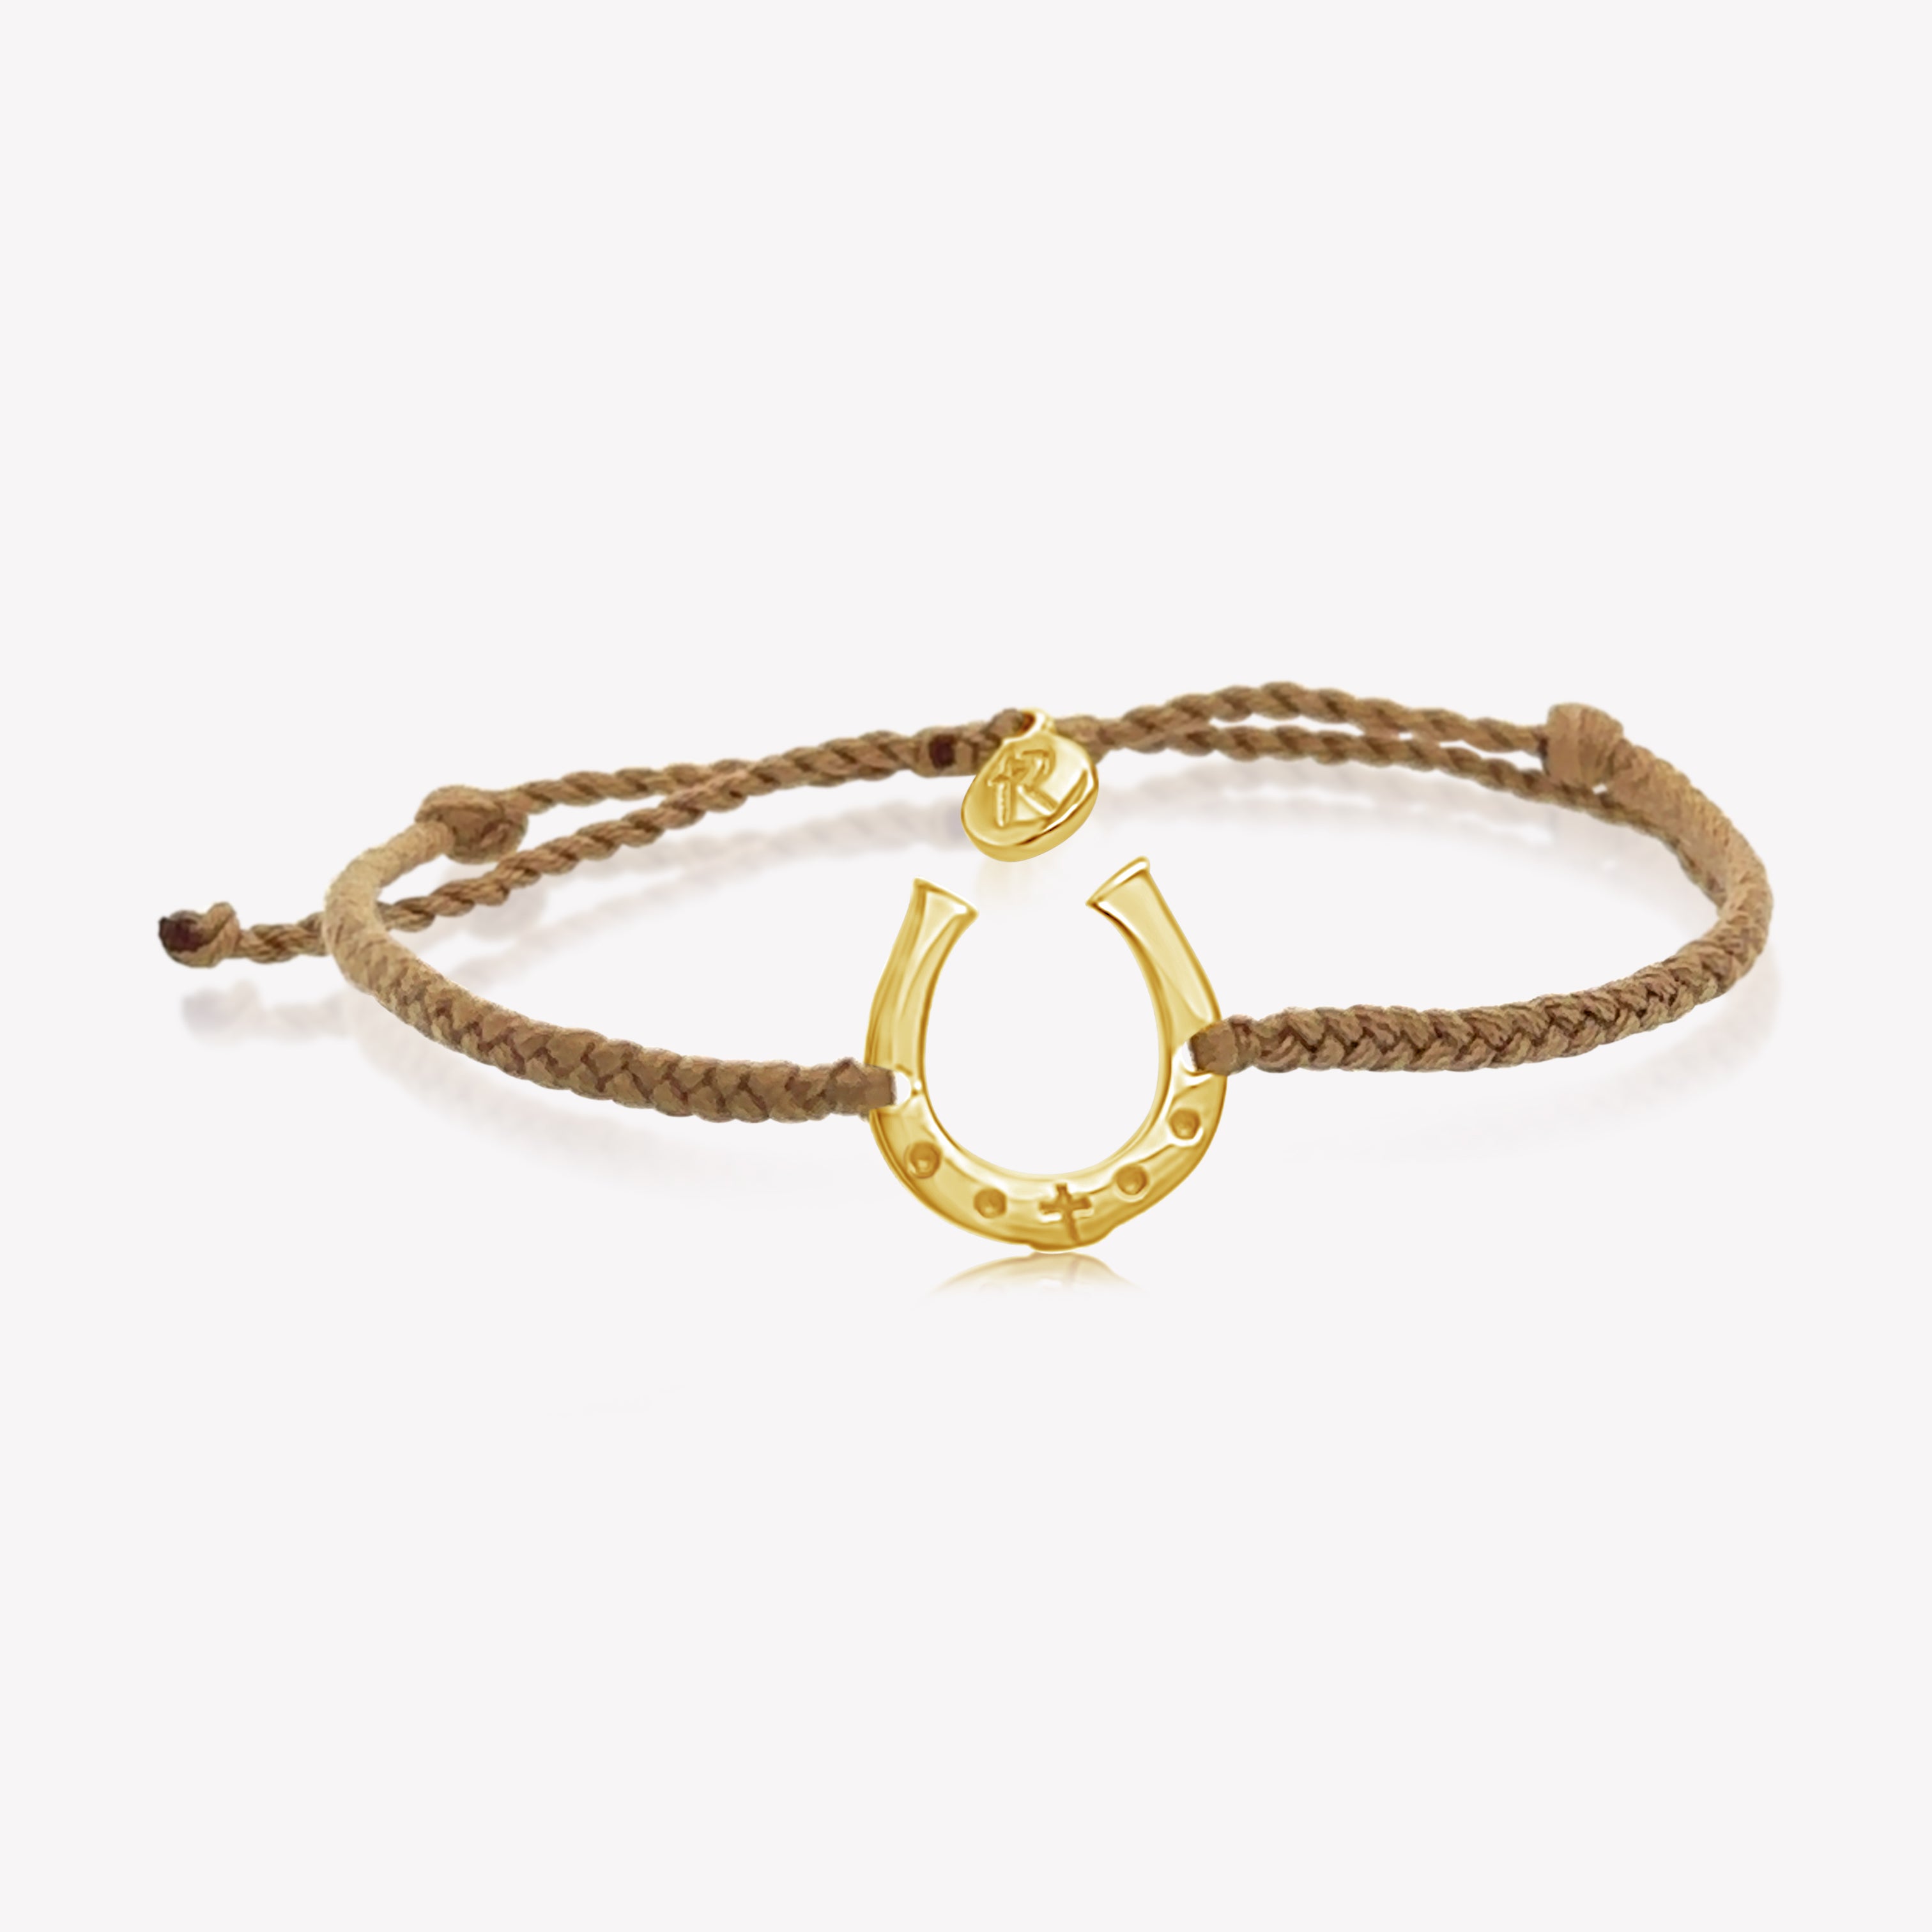 Close up of limited edition khaki cord friendship bracelet featuring a horseshoe pendant in gold from the Made4Ministry Collection by Rizen Jewelry benefitting Big Oak Ranch.